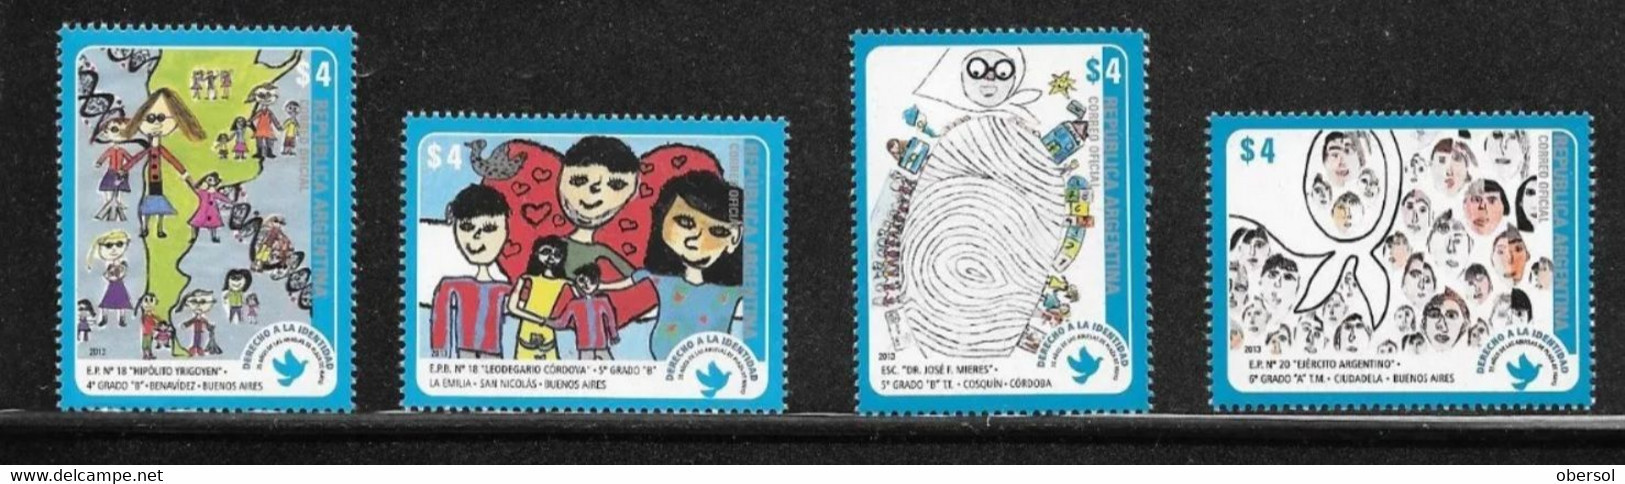 Argentina 2013 Identity Rights Kinder Drawings Complete Set MNH - Nuevos